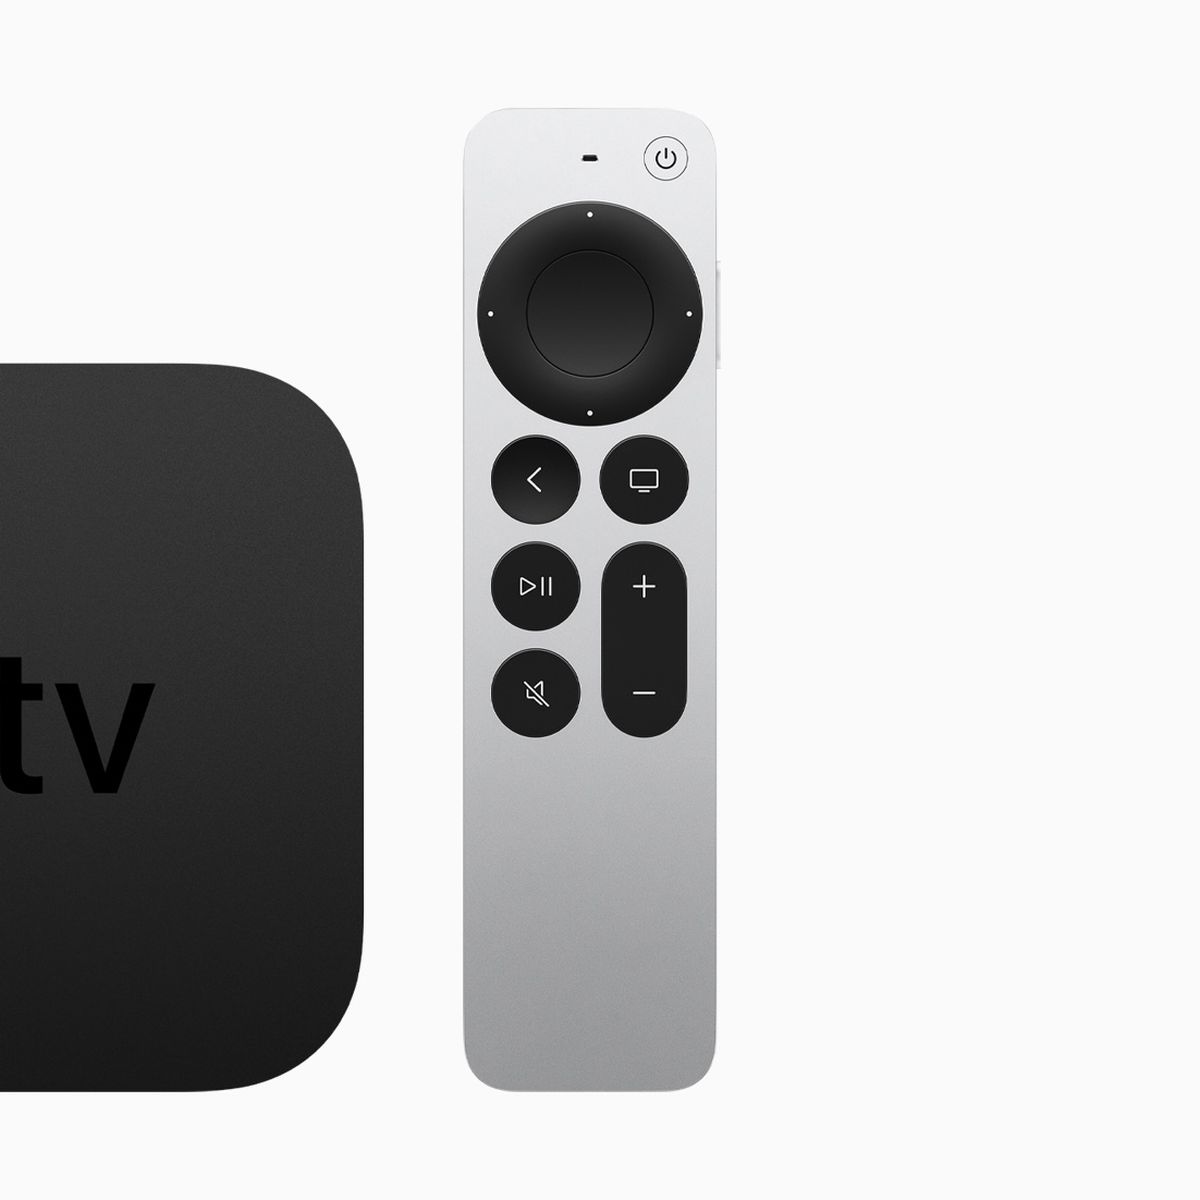 New Apple TV 4K Supports WiFi 6, Thread and HDMI 2.1 -